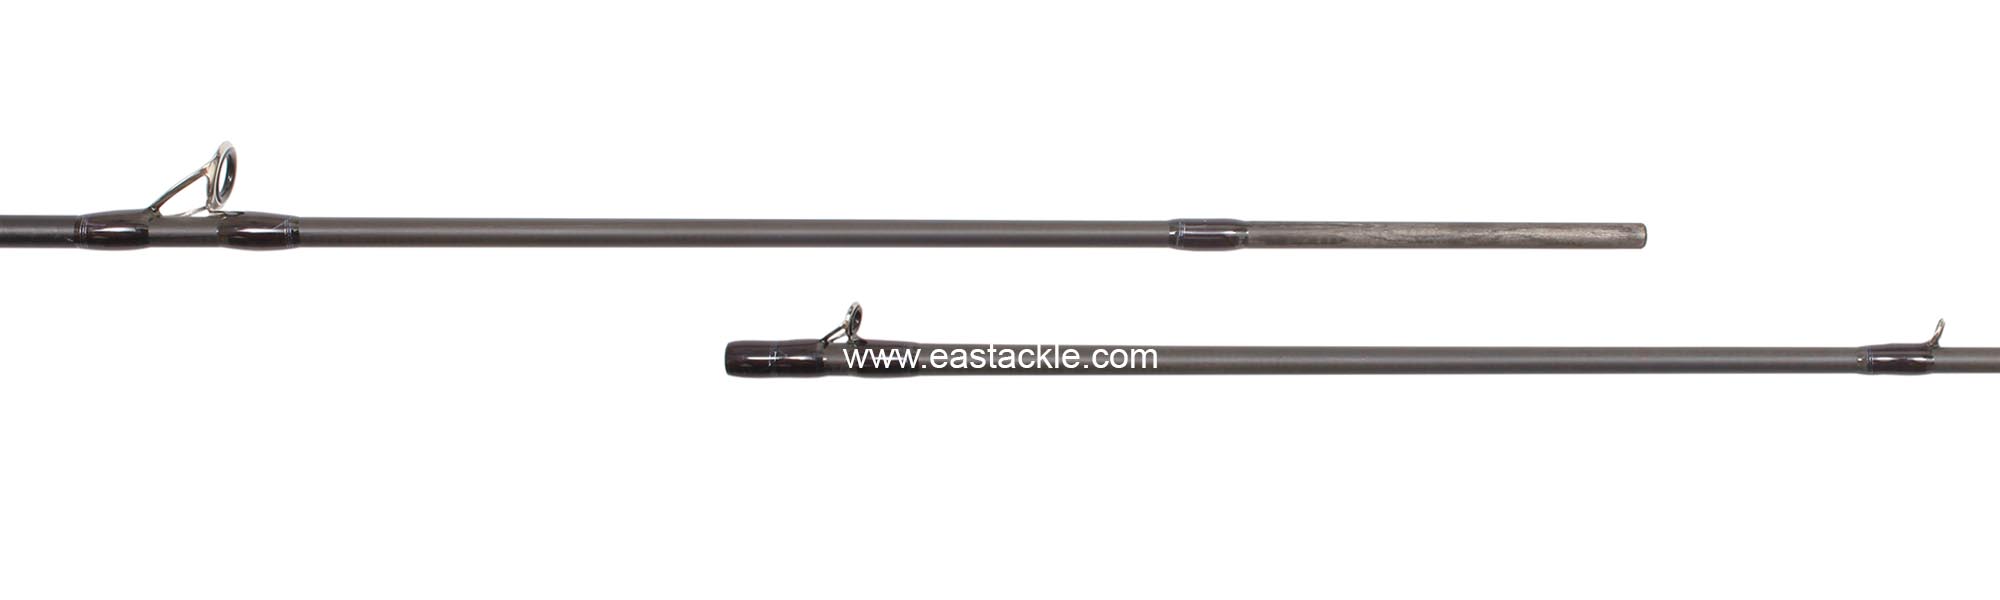 Rapala - RFS Finesse Series - RFSC632XL - Bait Casting Rod - Joint Section | Eastackle